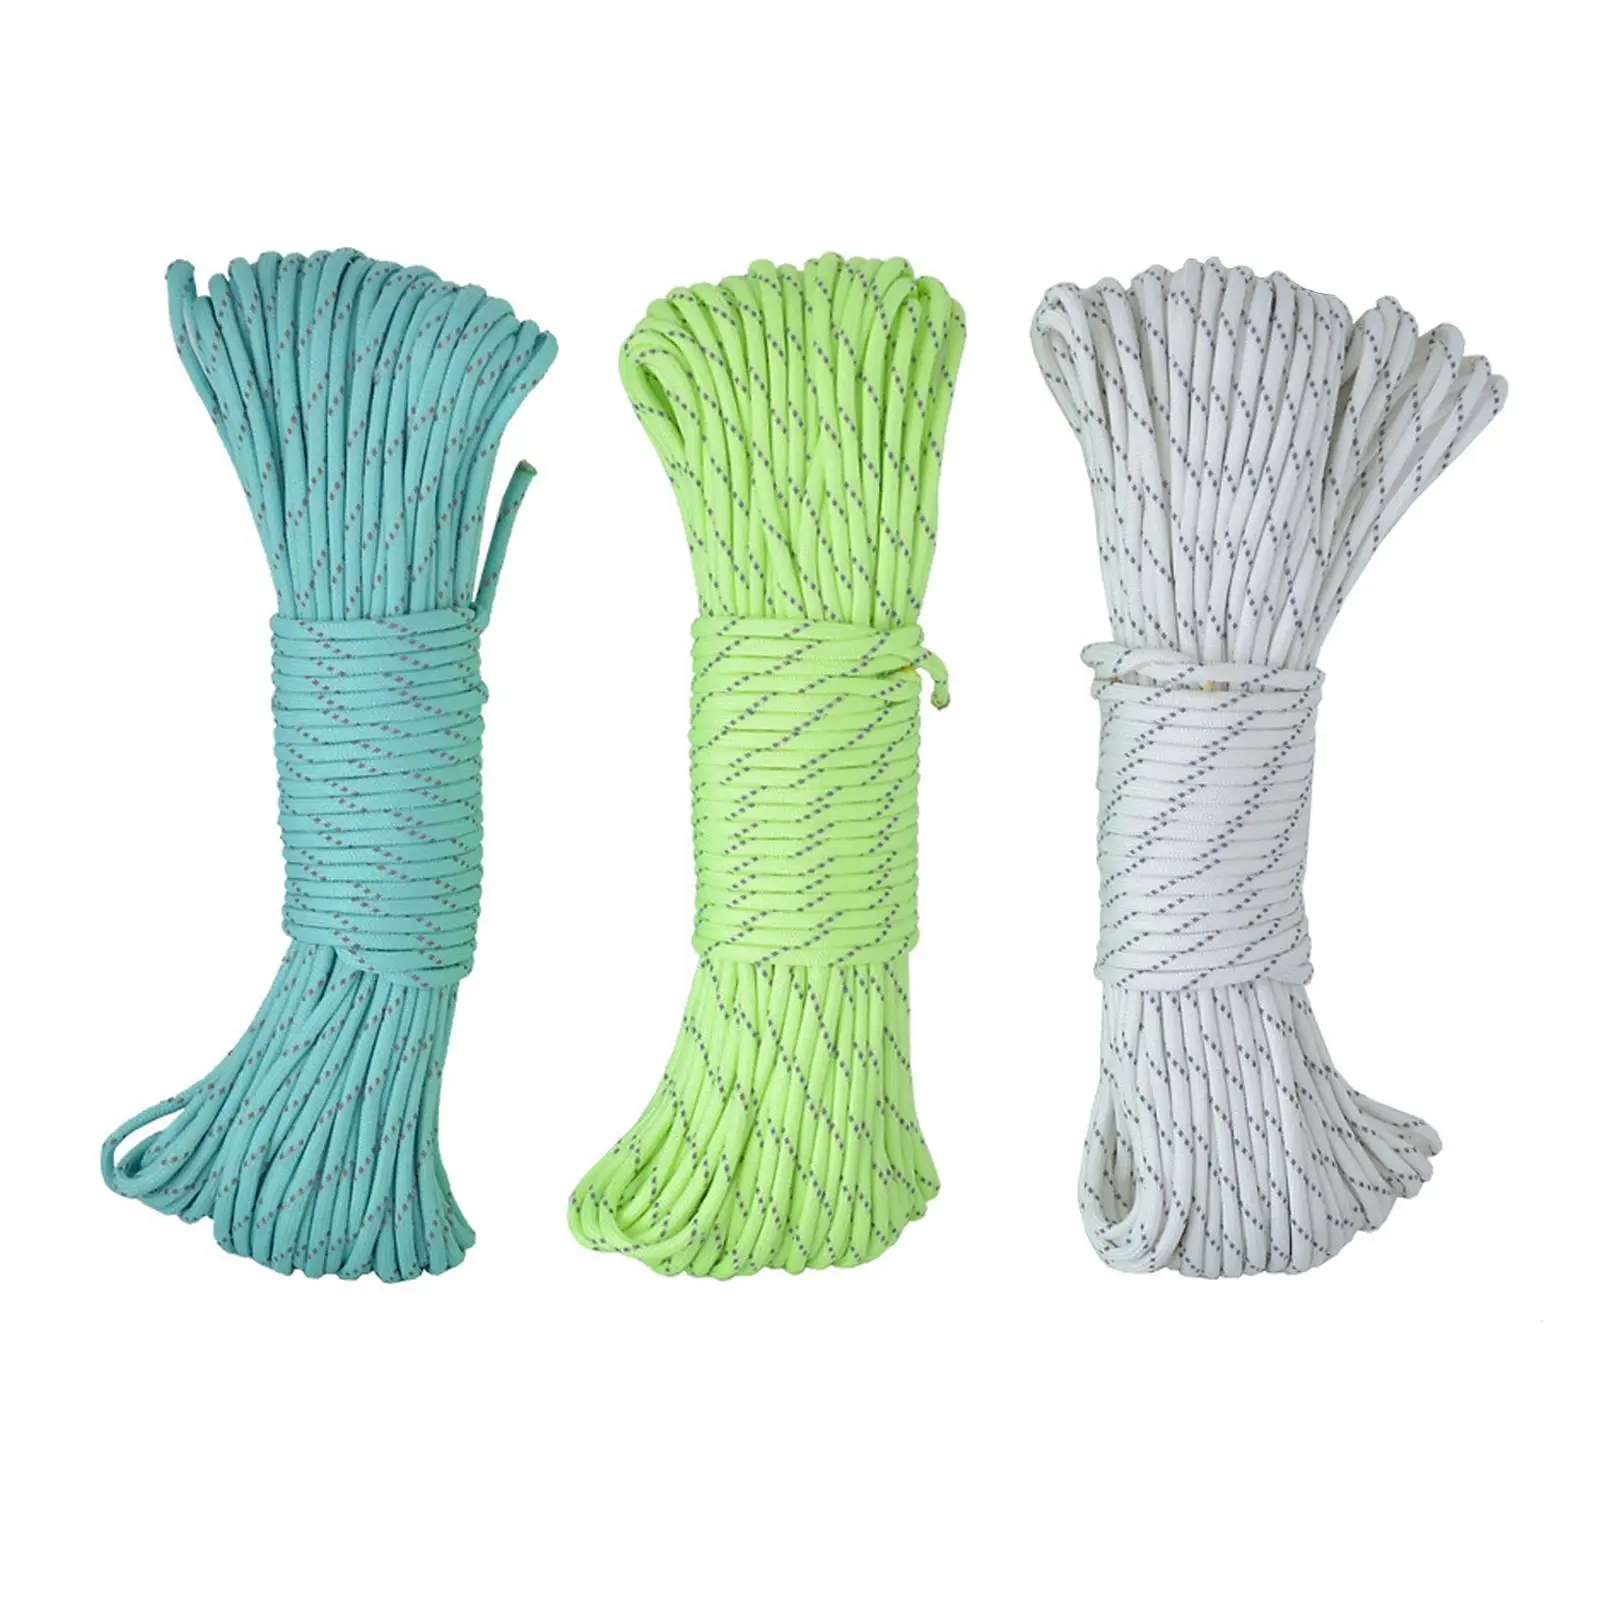  The Dark Camping Rope 31M for Outdoor Packaging Bracelet Braiding